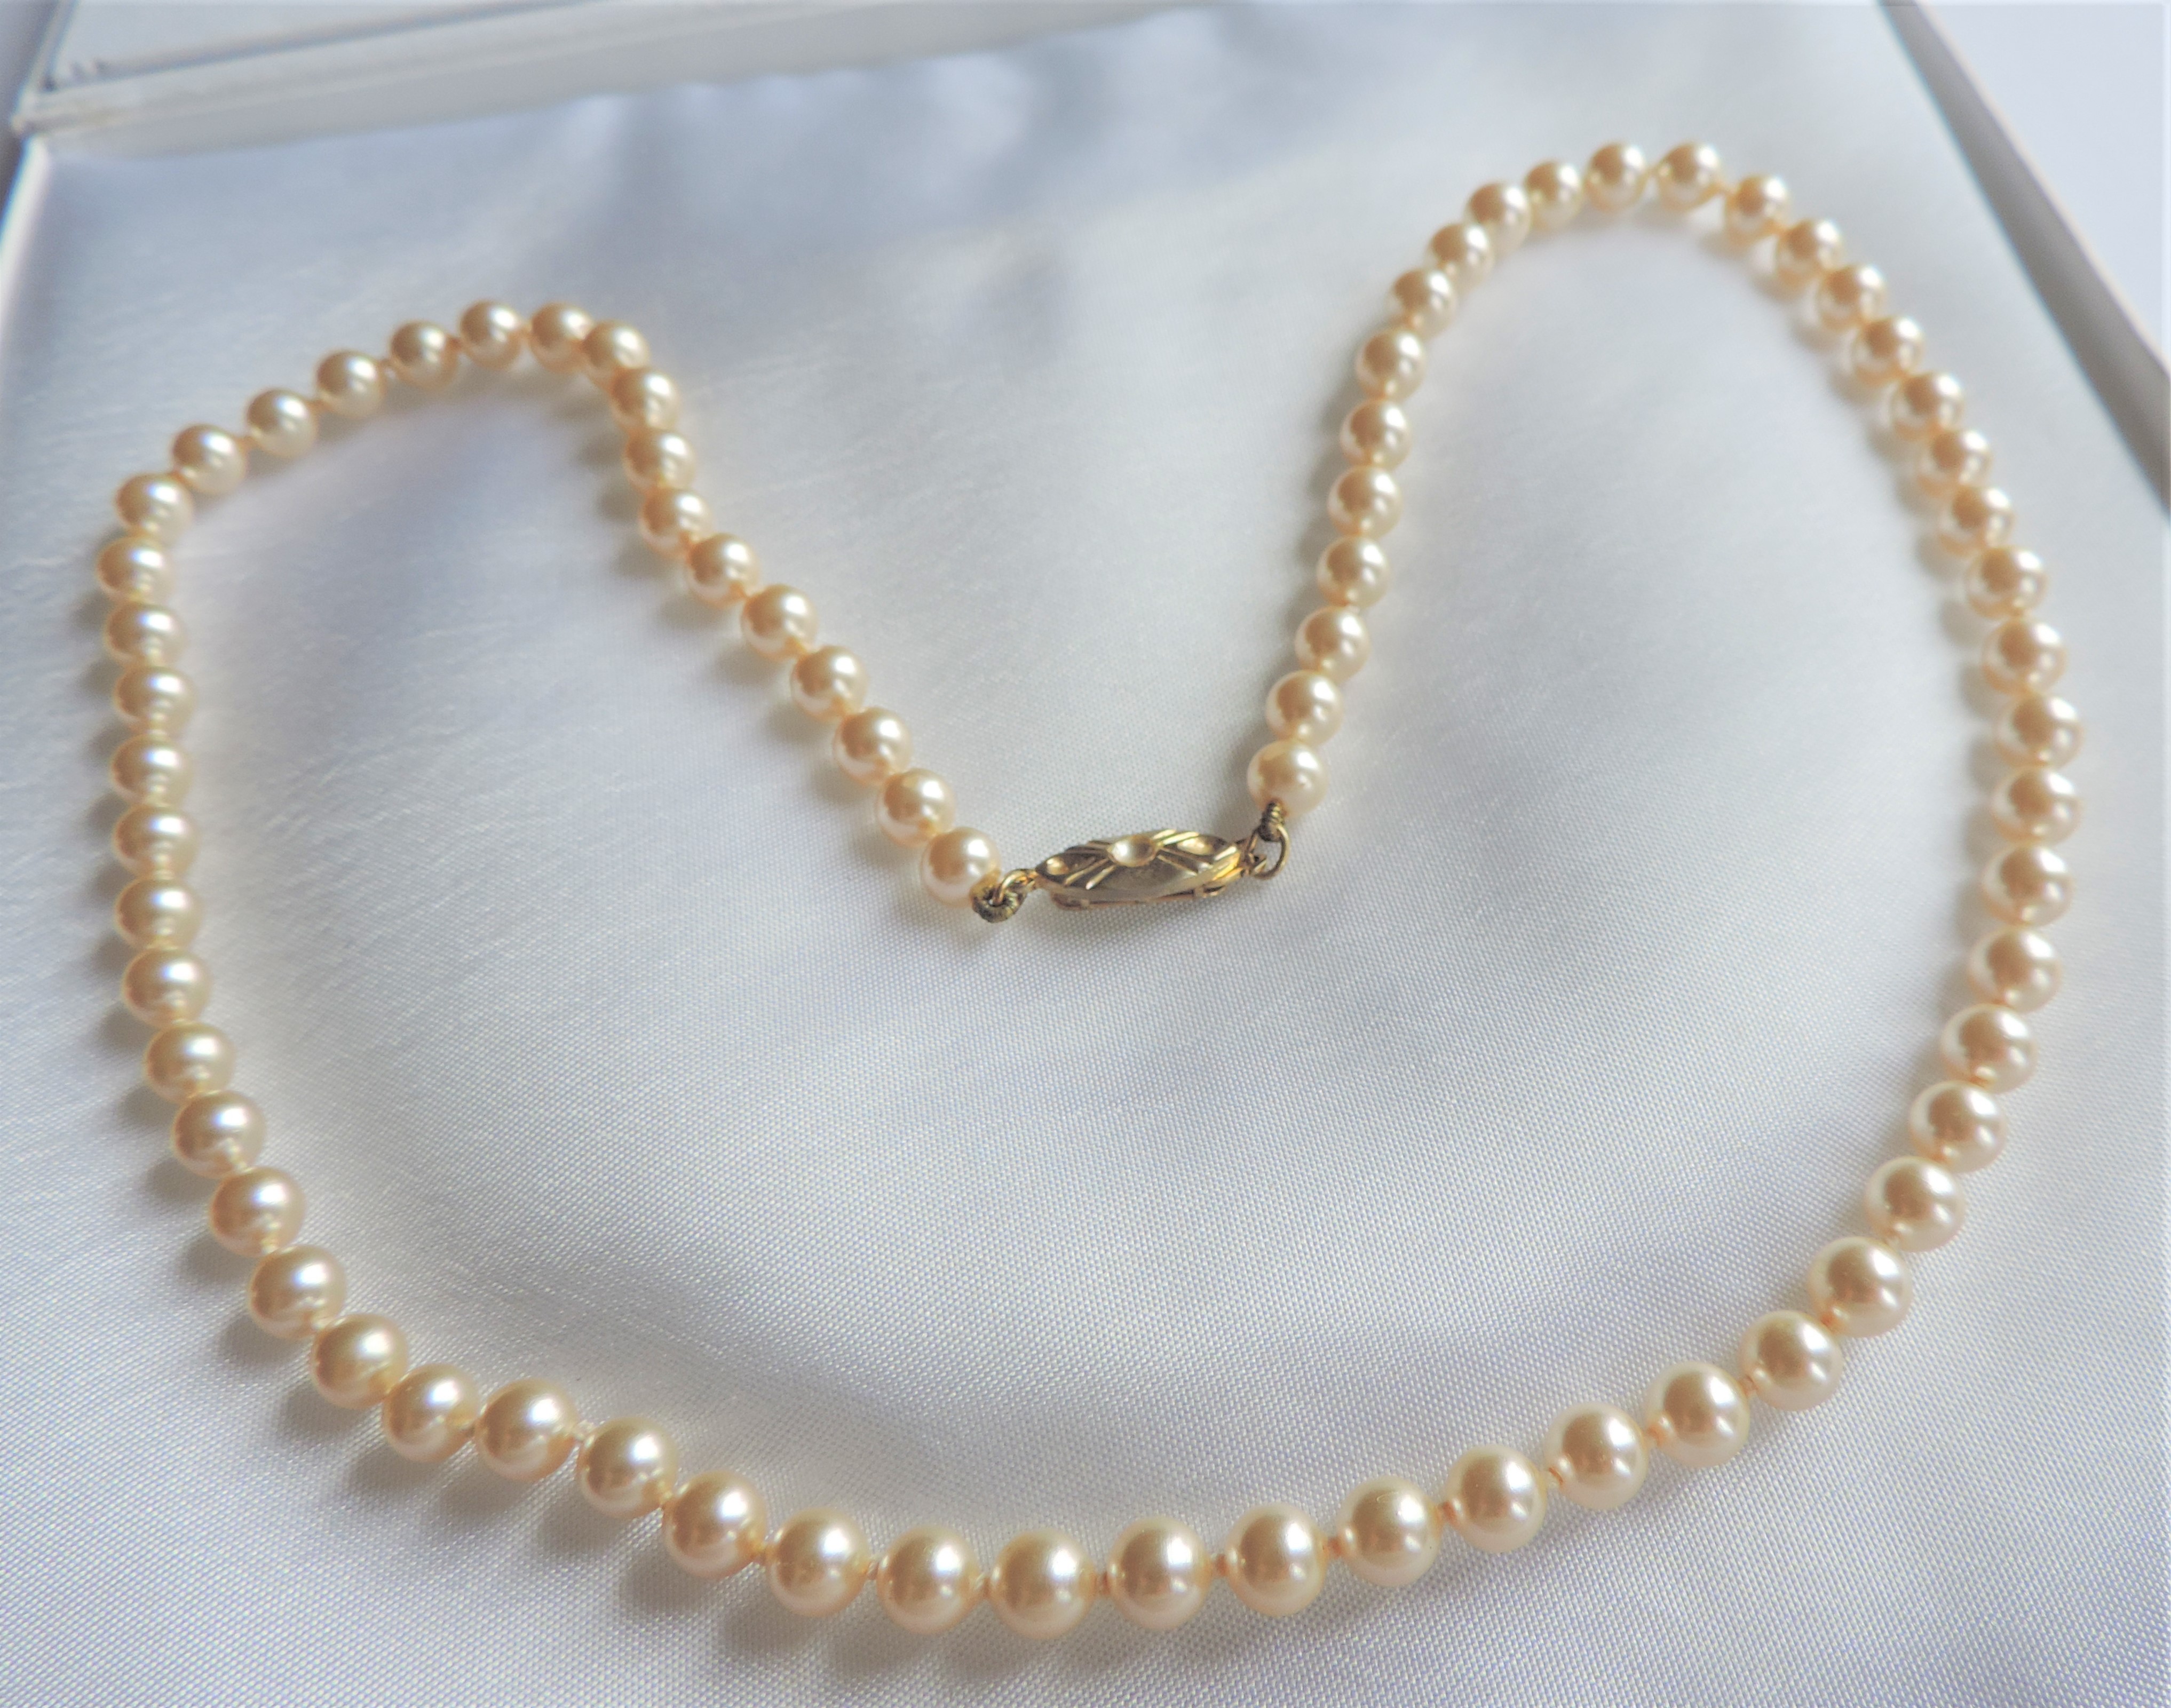 20 inch Single Strand Pearl Necklace with Gift Pouch - Image 2 of 3